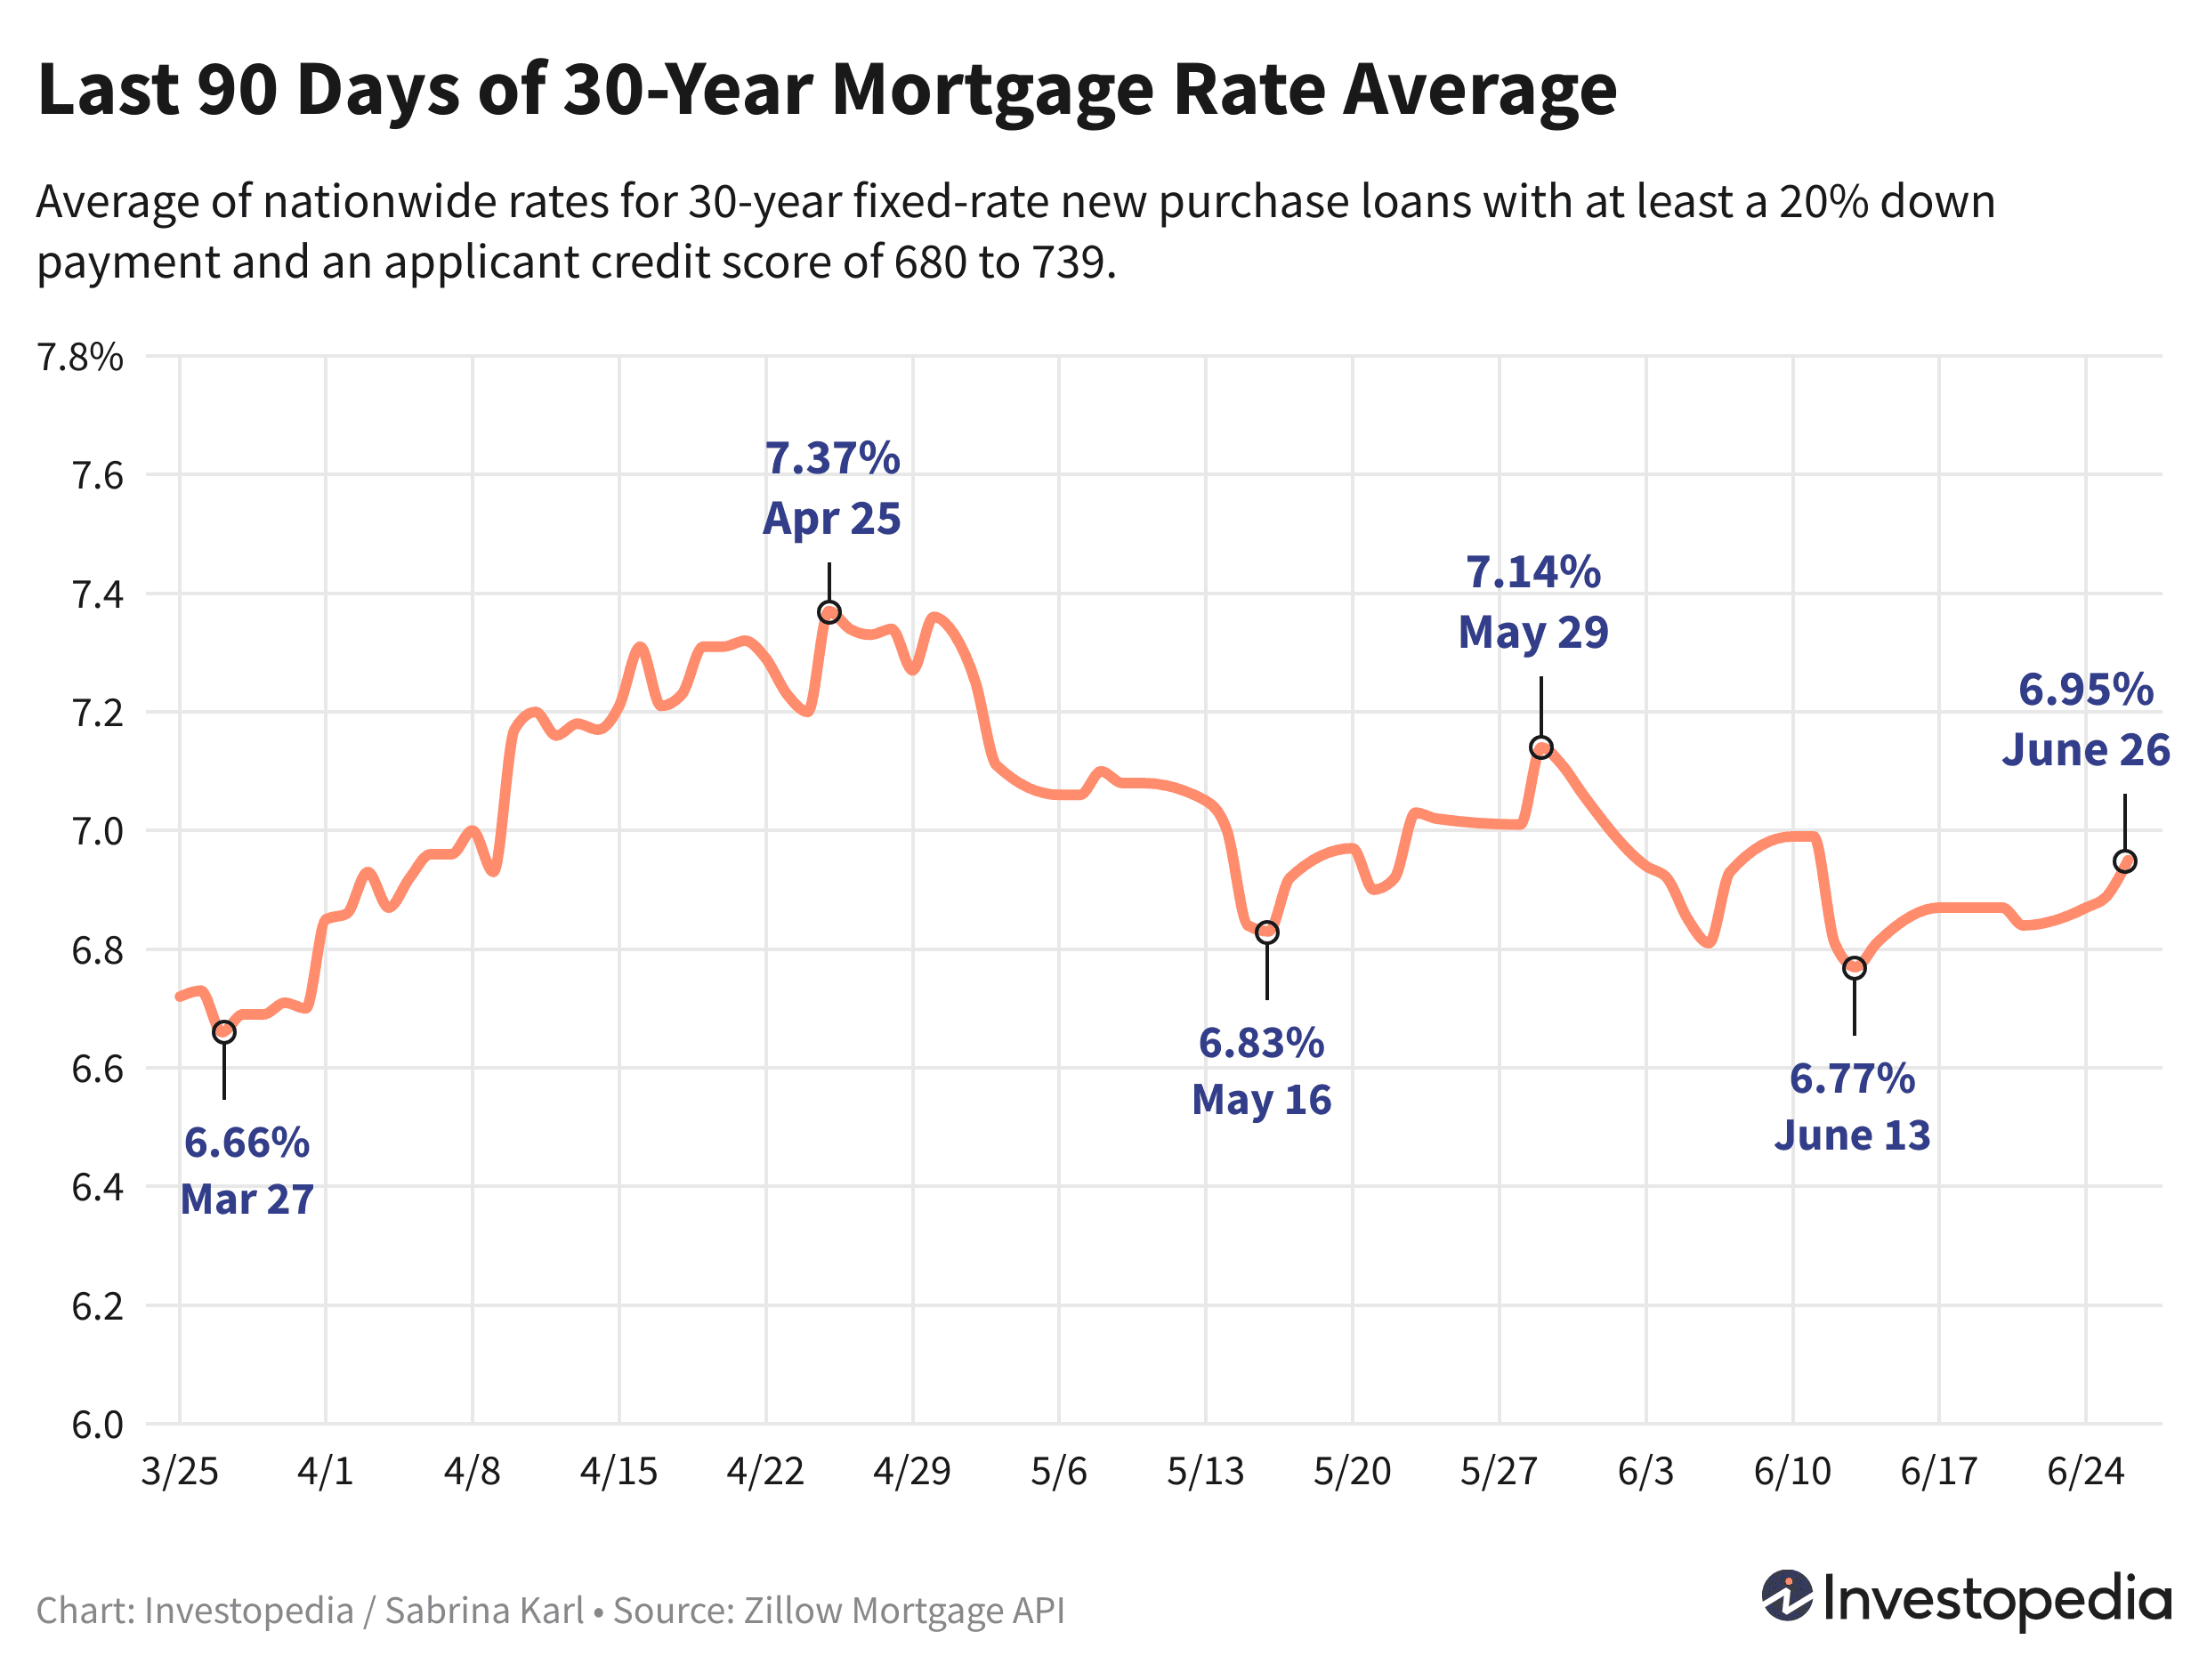 Line graph showing the last 90 days of the 30-year new purchase mortgage rate average - June 27, 2024